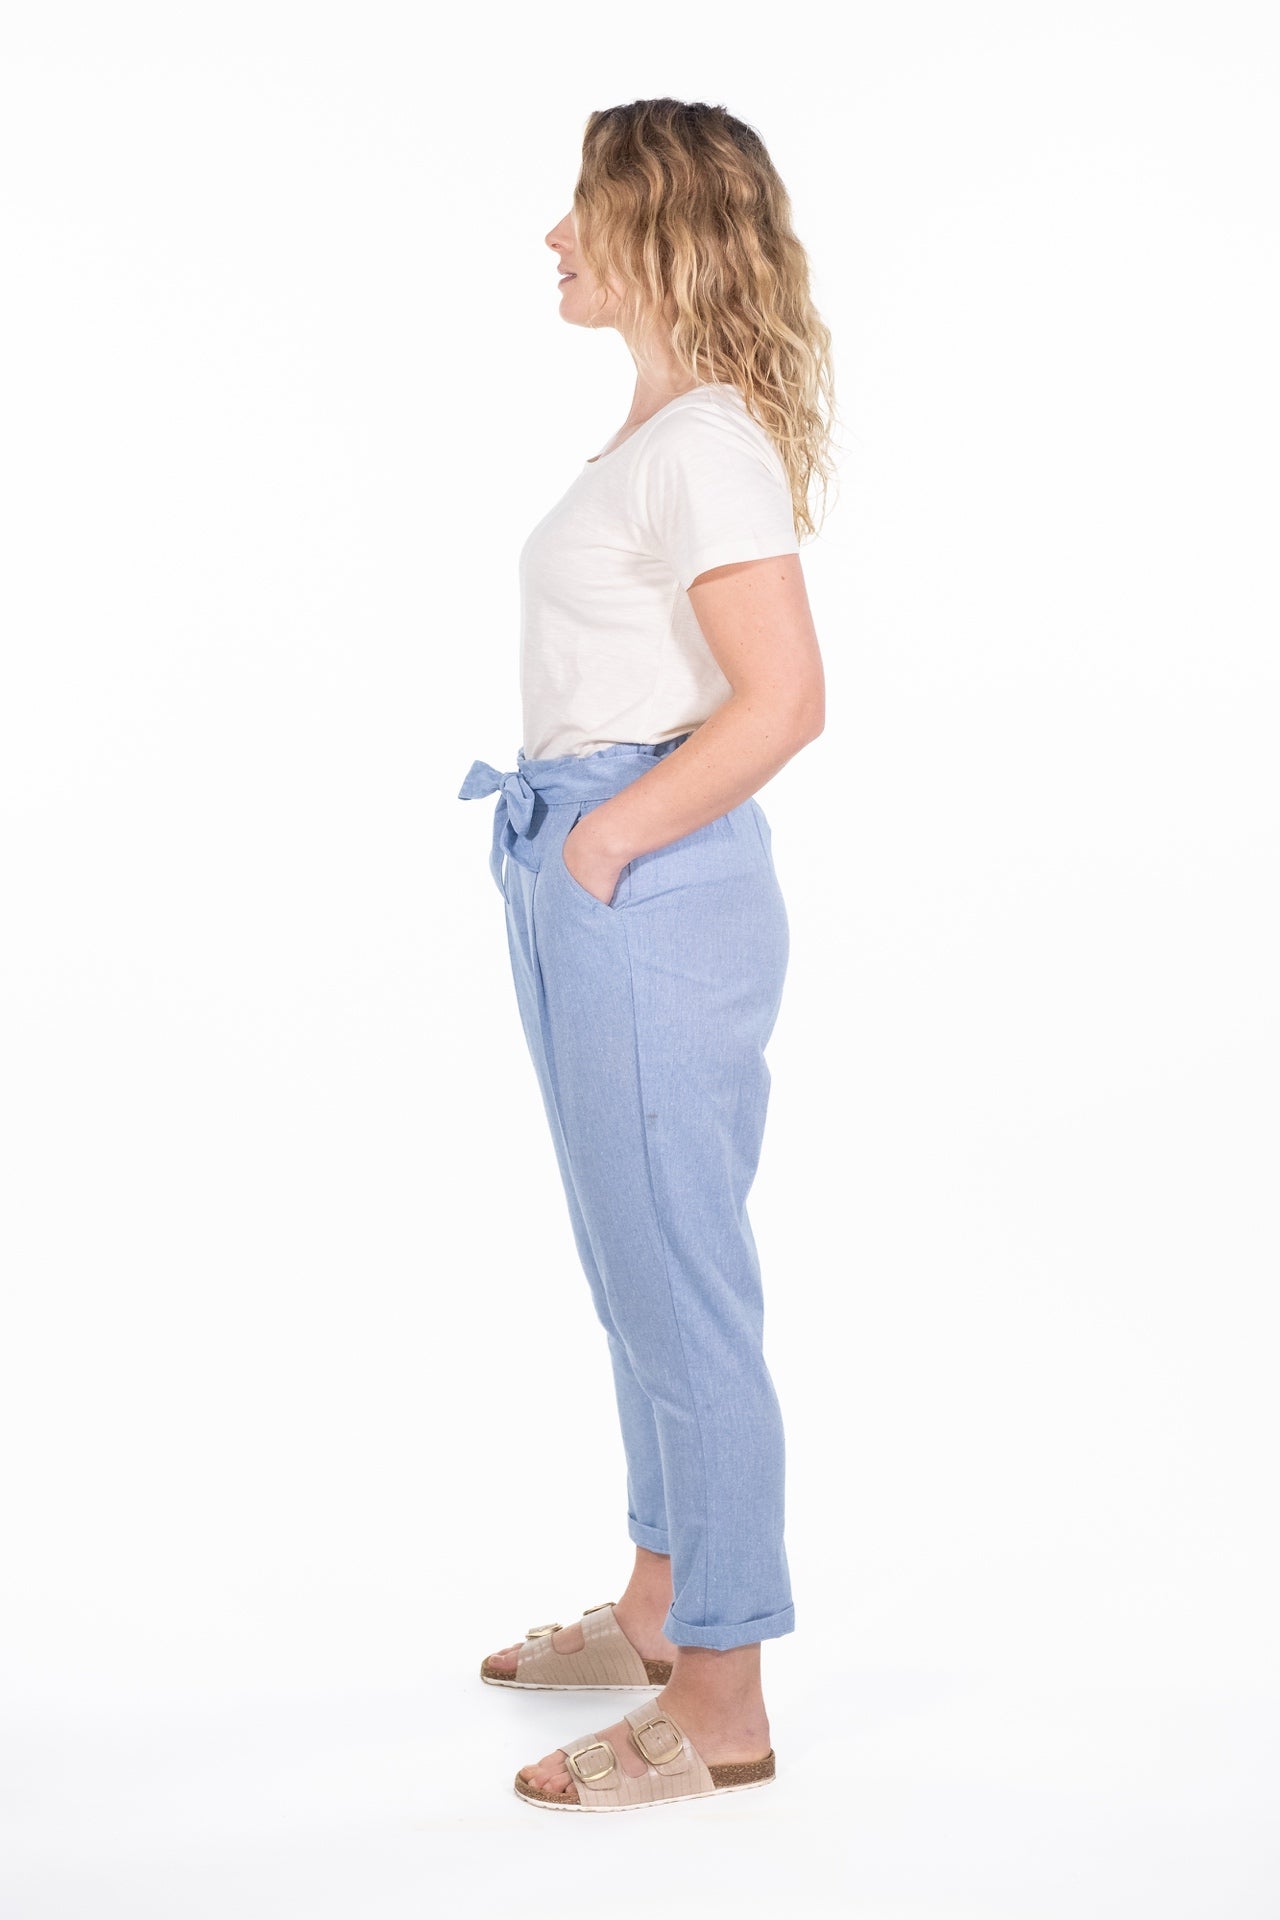 Layla Chambray Trouser - Rupert and Buckley - Trousers